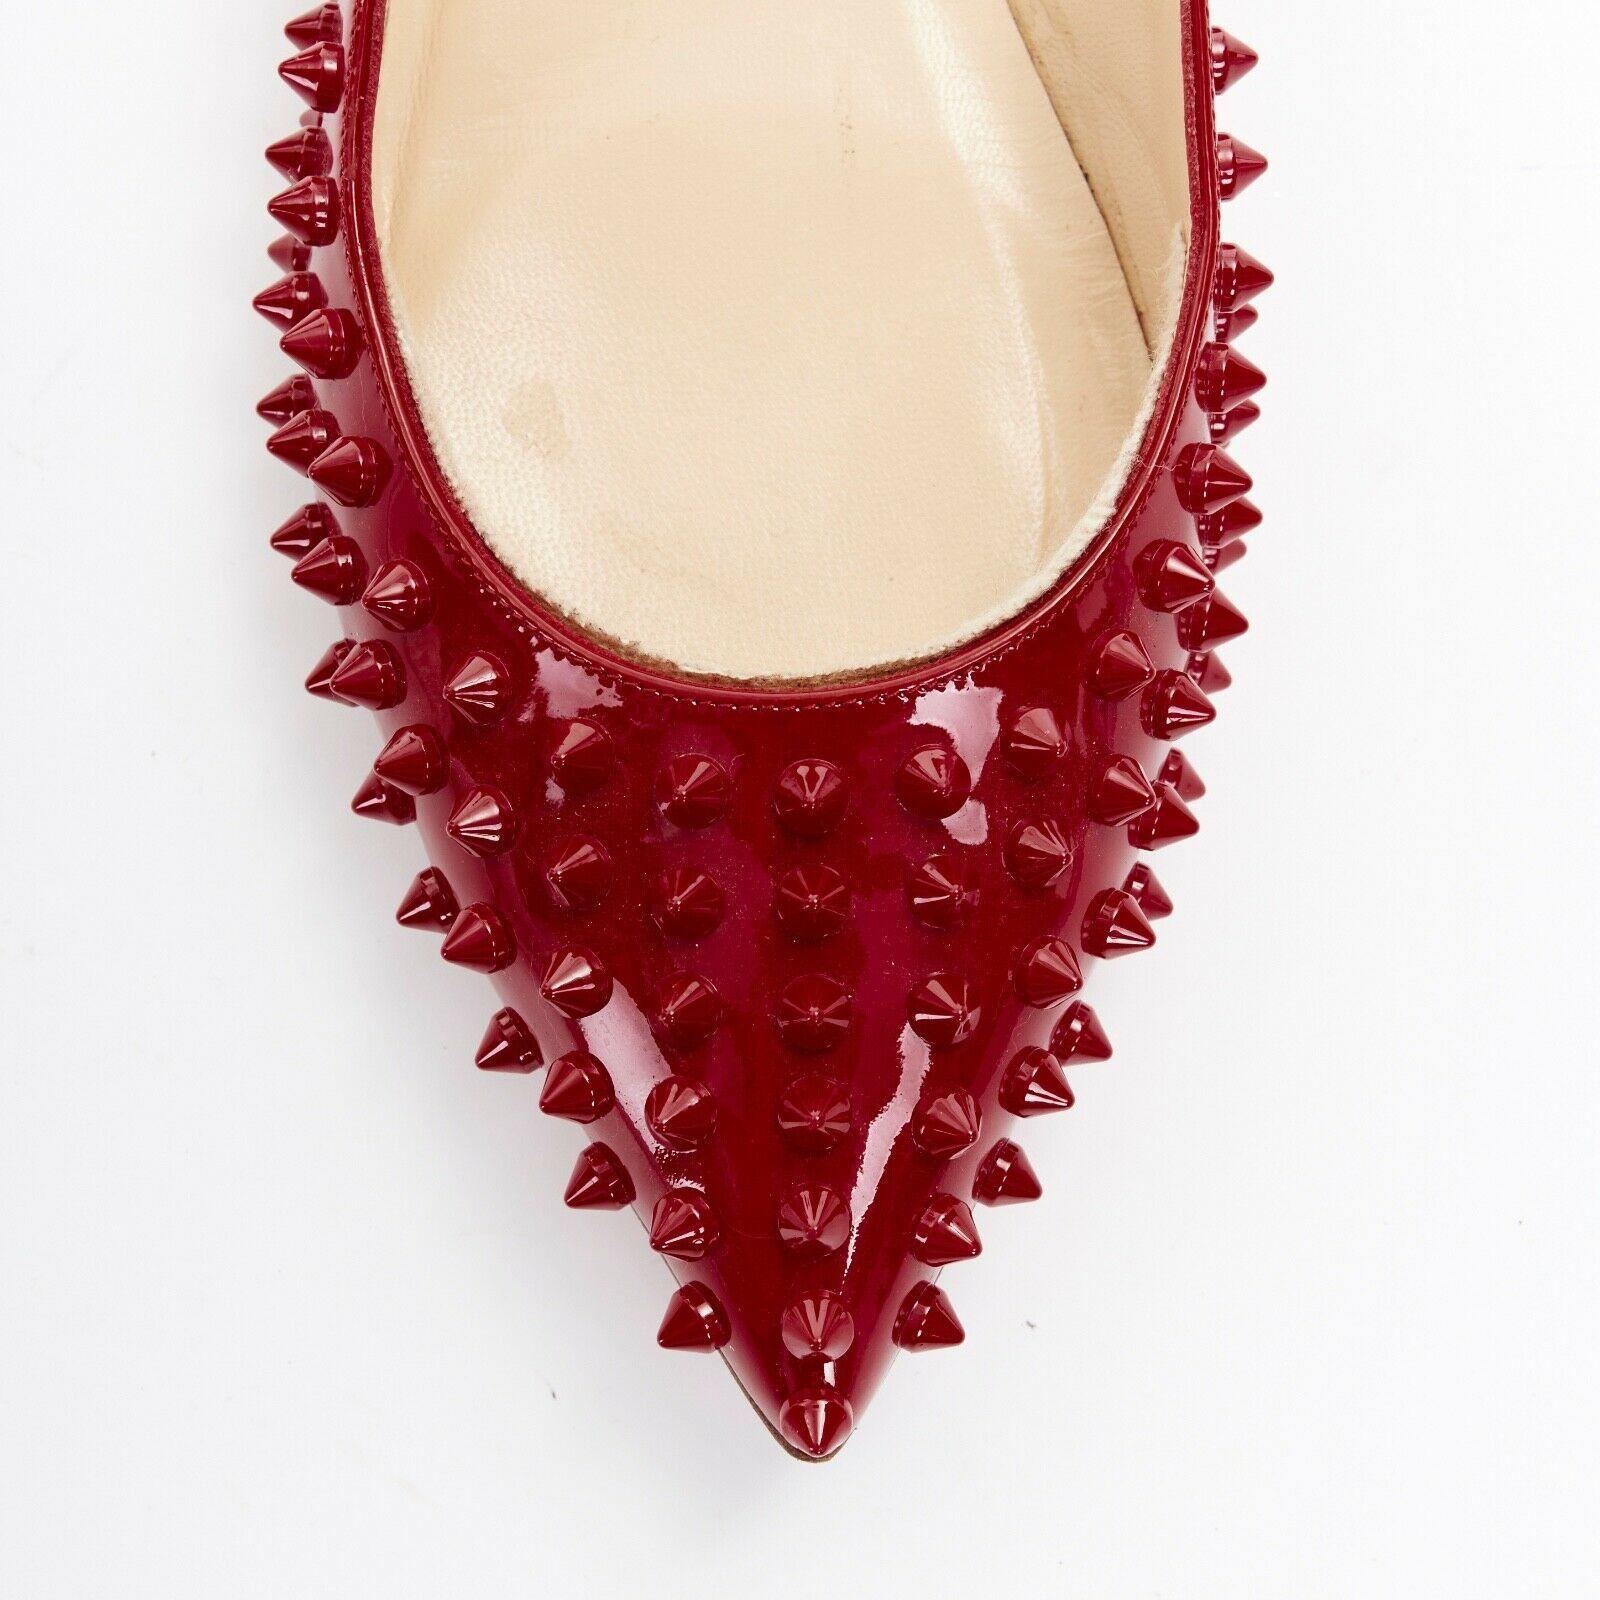 Women's CHRISTIAN LOUBOUTIN Pigalle Spikes red patent studded pointy flats EU38.5